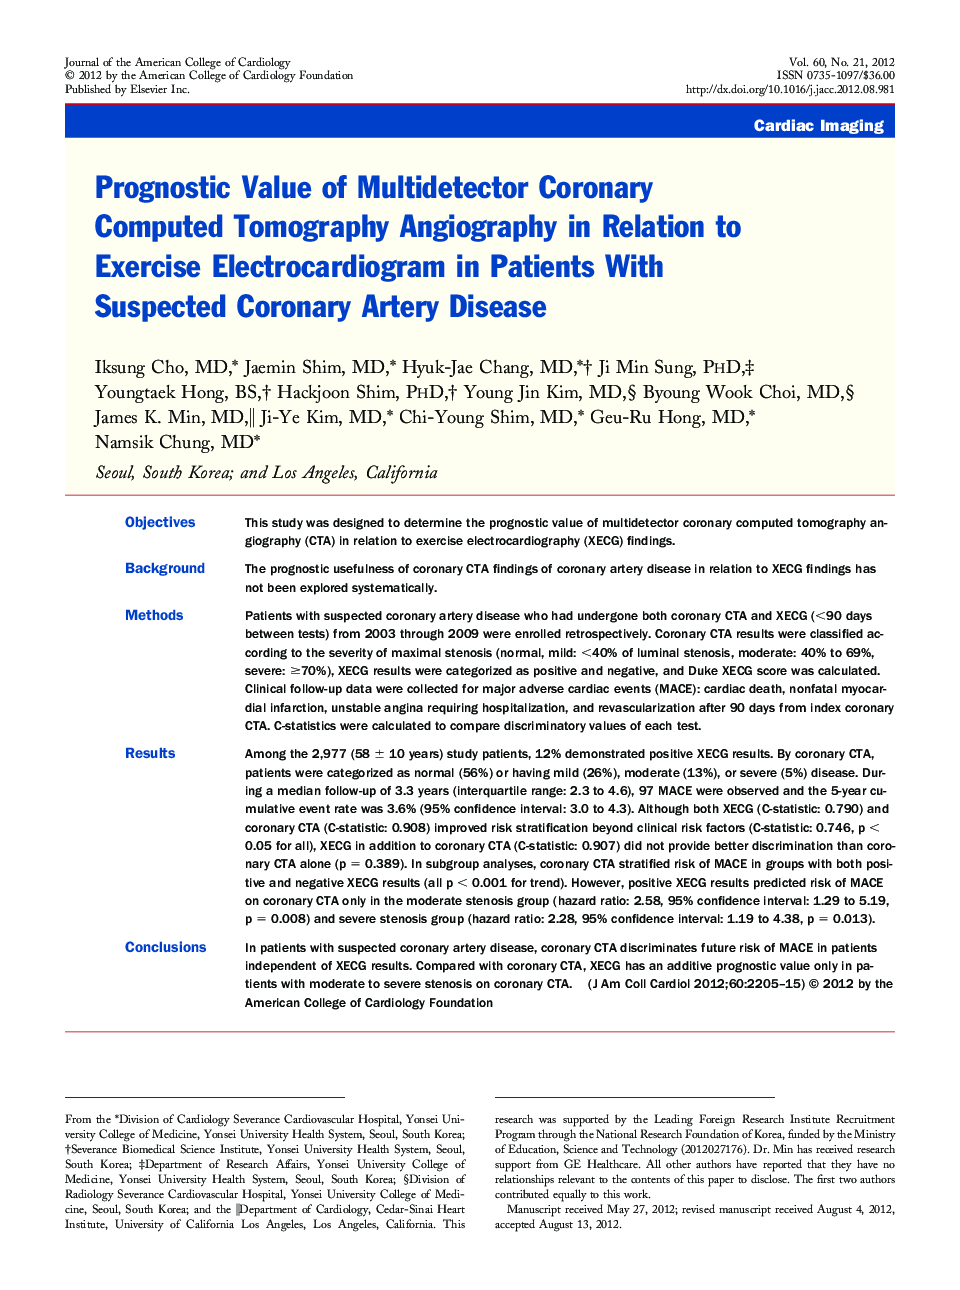 Prognostic Value of Multidetector Coronary Computed Tomography Angiography in Relation to Exercise Electrocardiogram in Patients With Suspected Coronary Artery Disease 